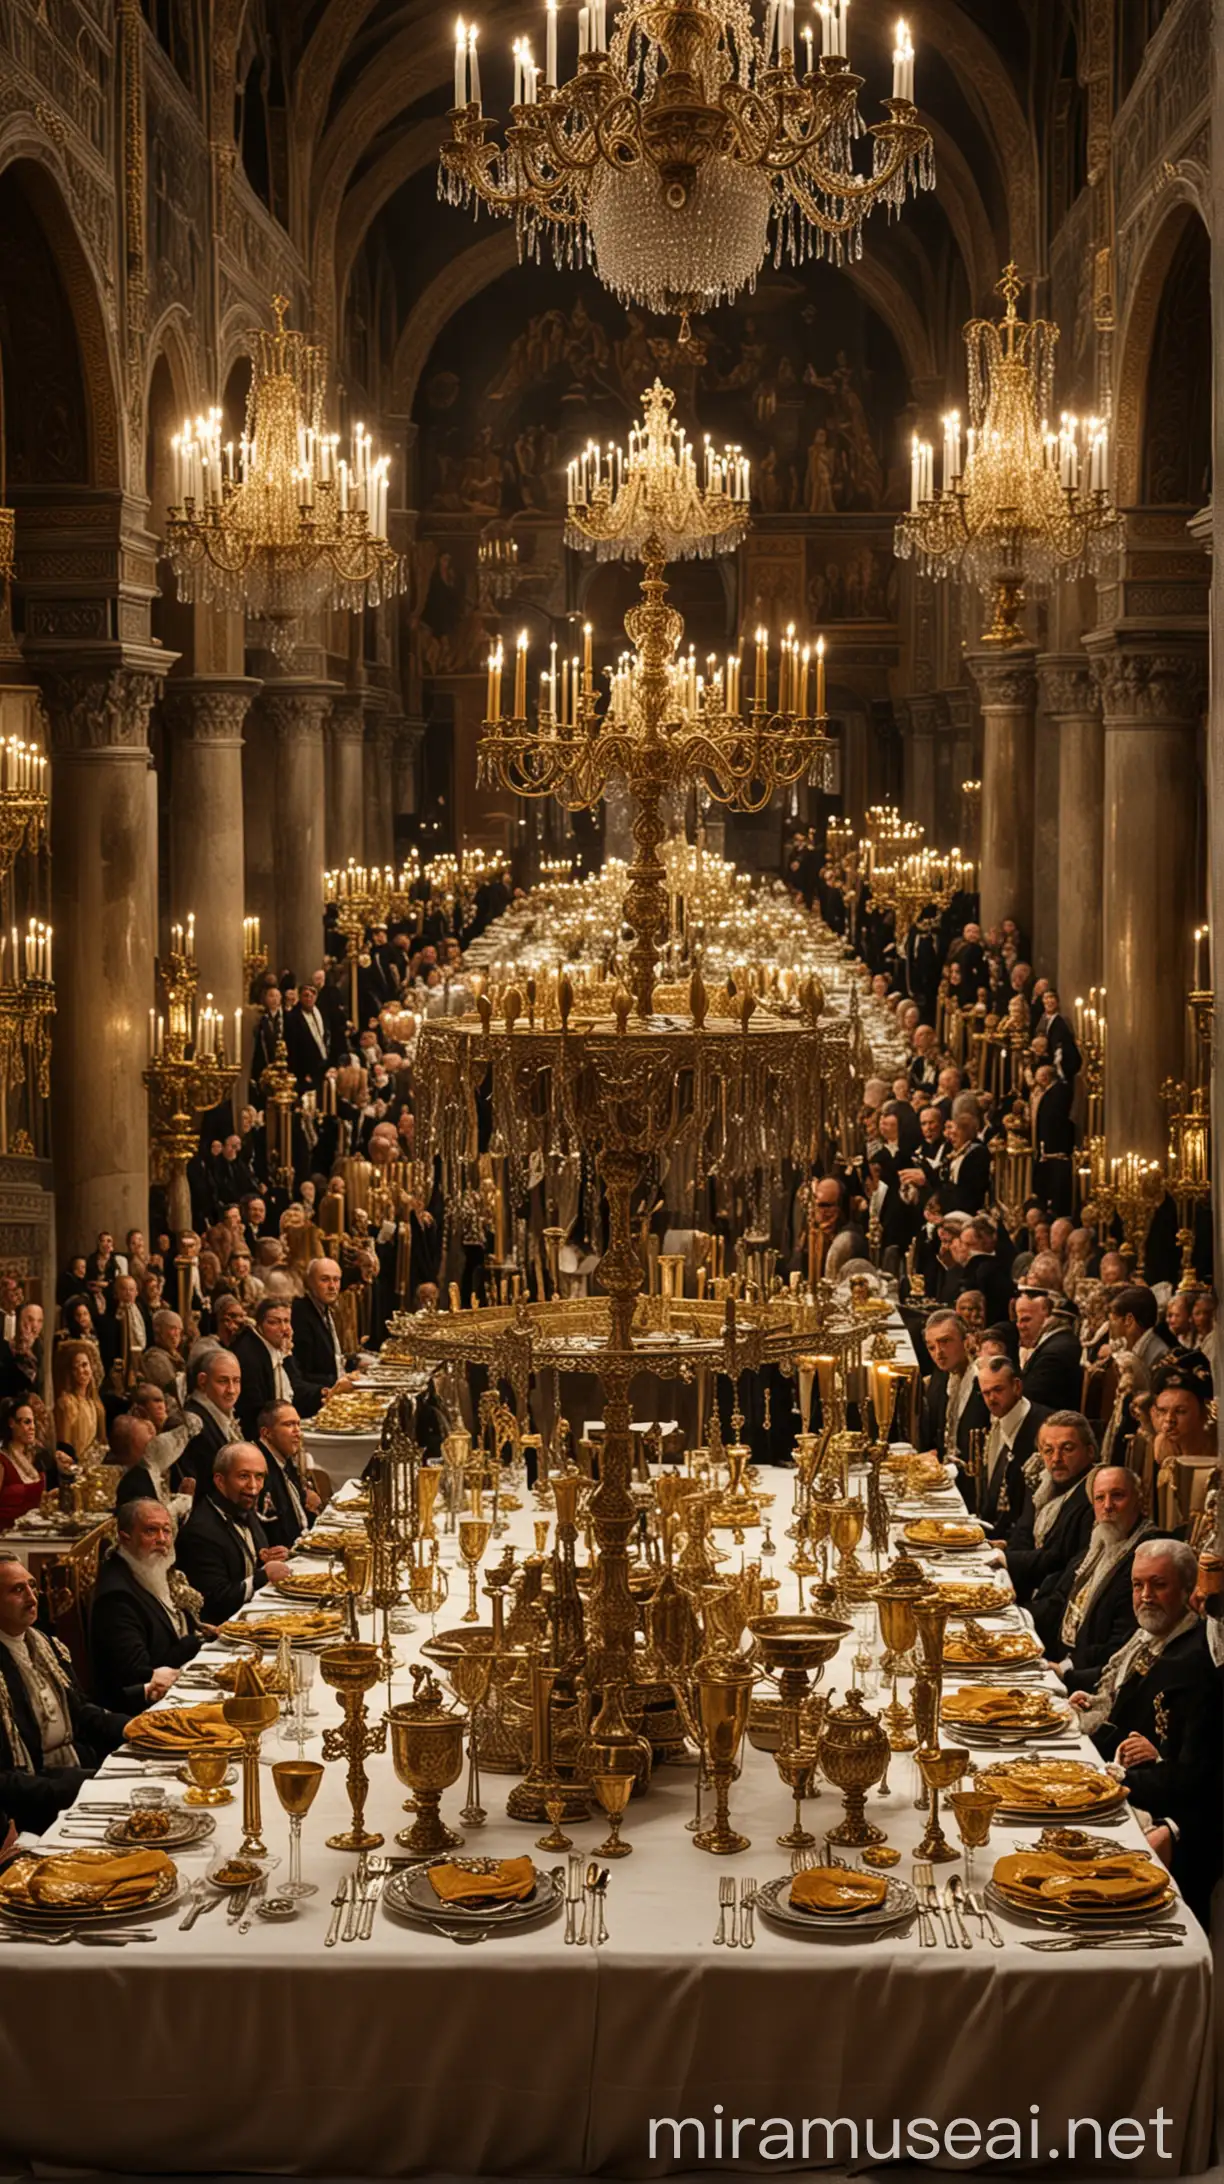 Regal Banquet in Ancient Hall with Golden Utensils and Kings Throne